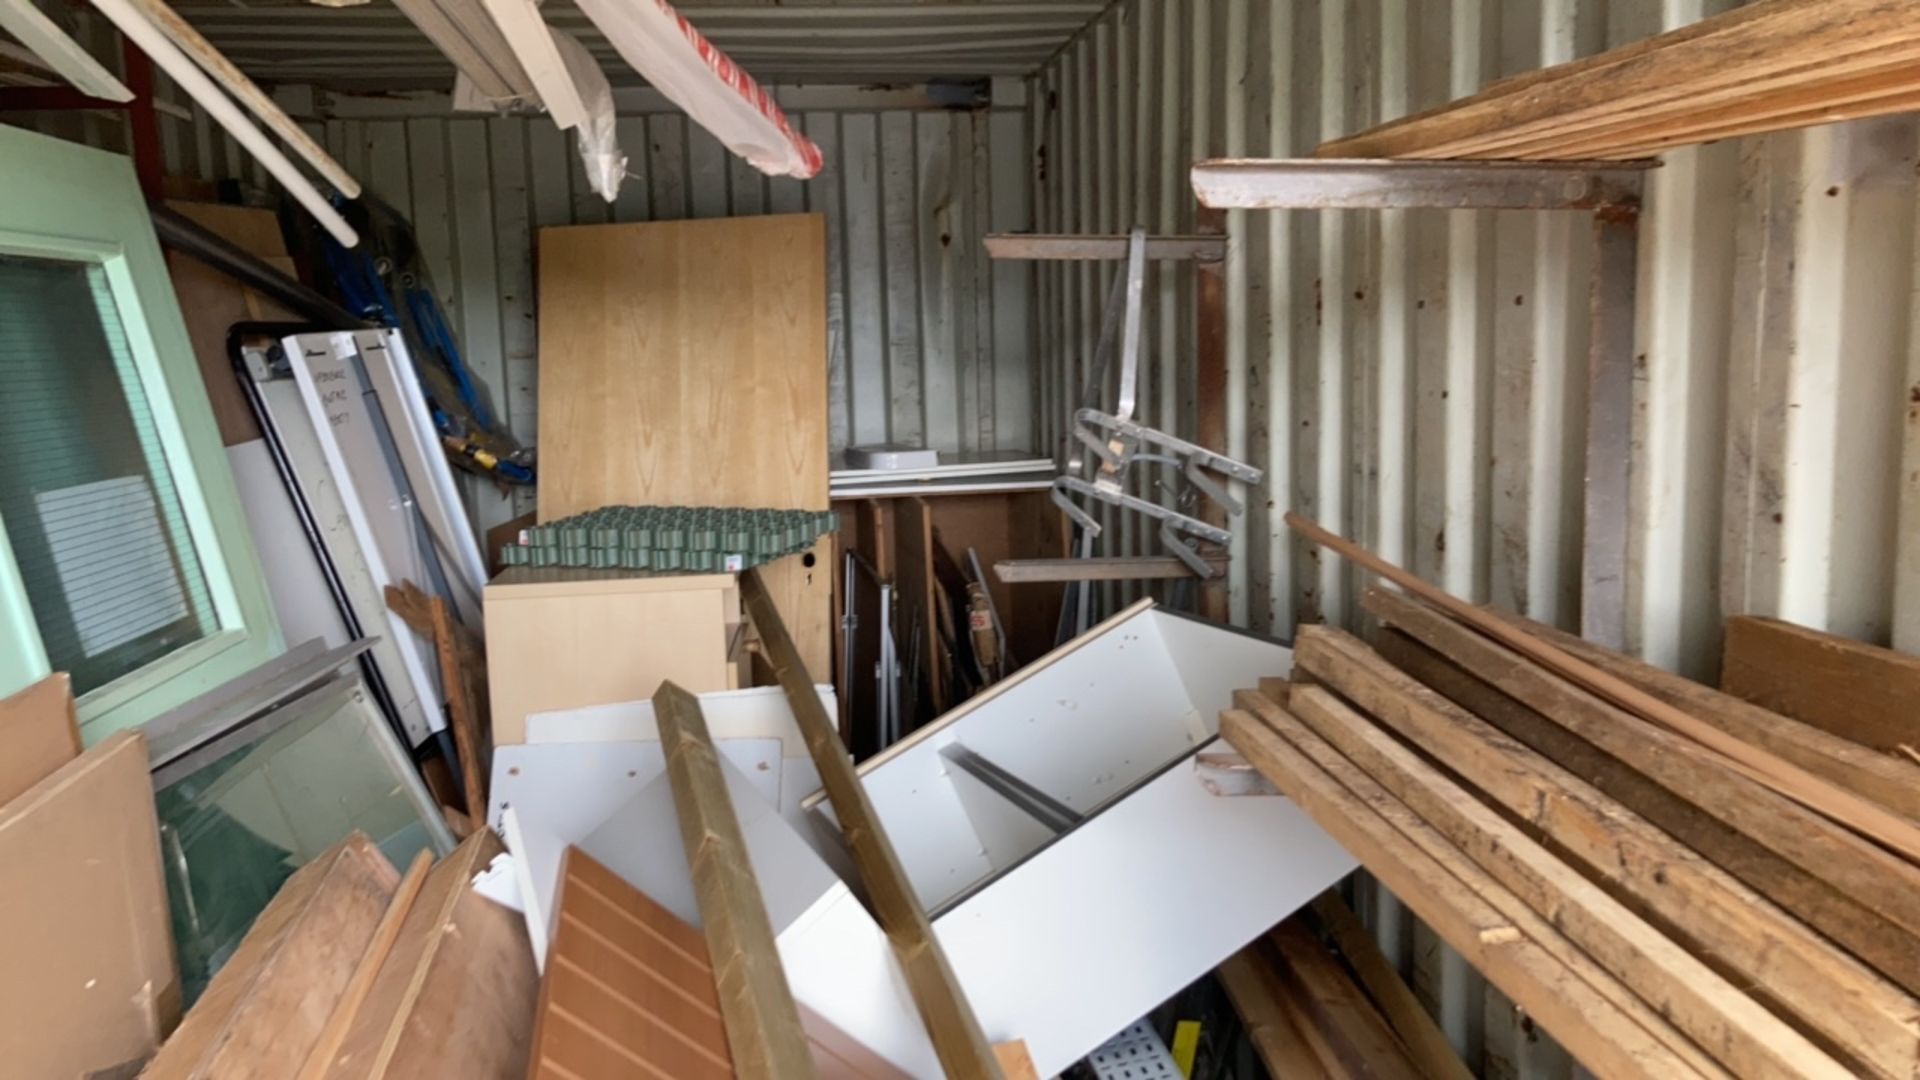 Shipping Container And Contents - Image 3 of 5